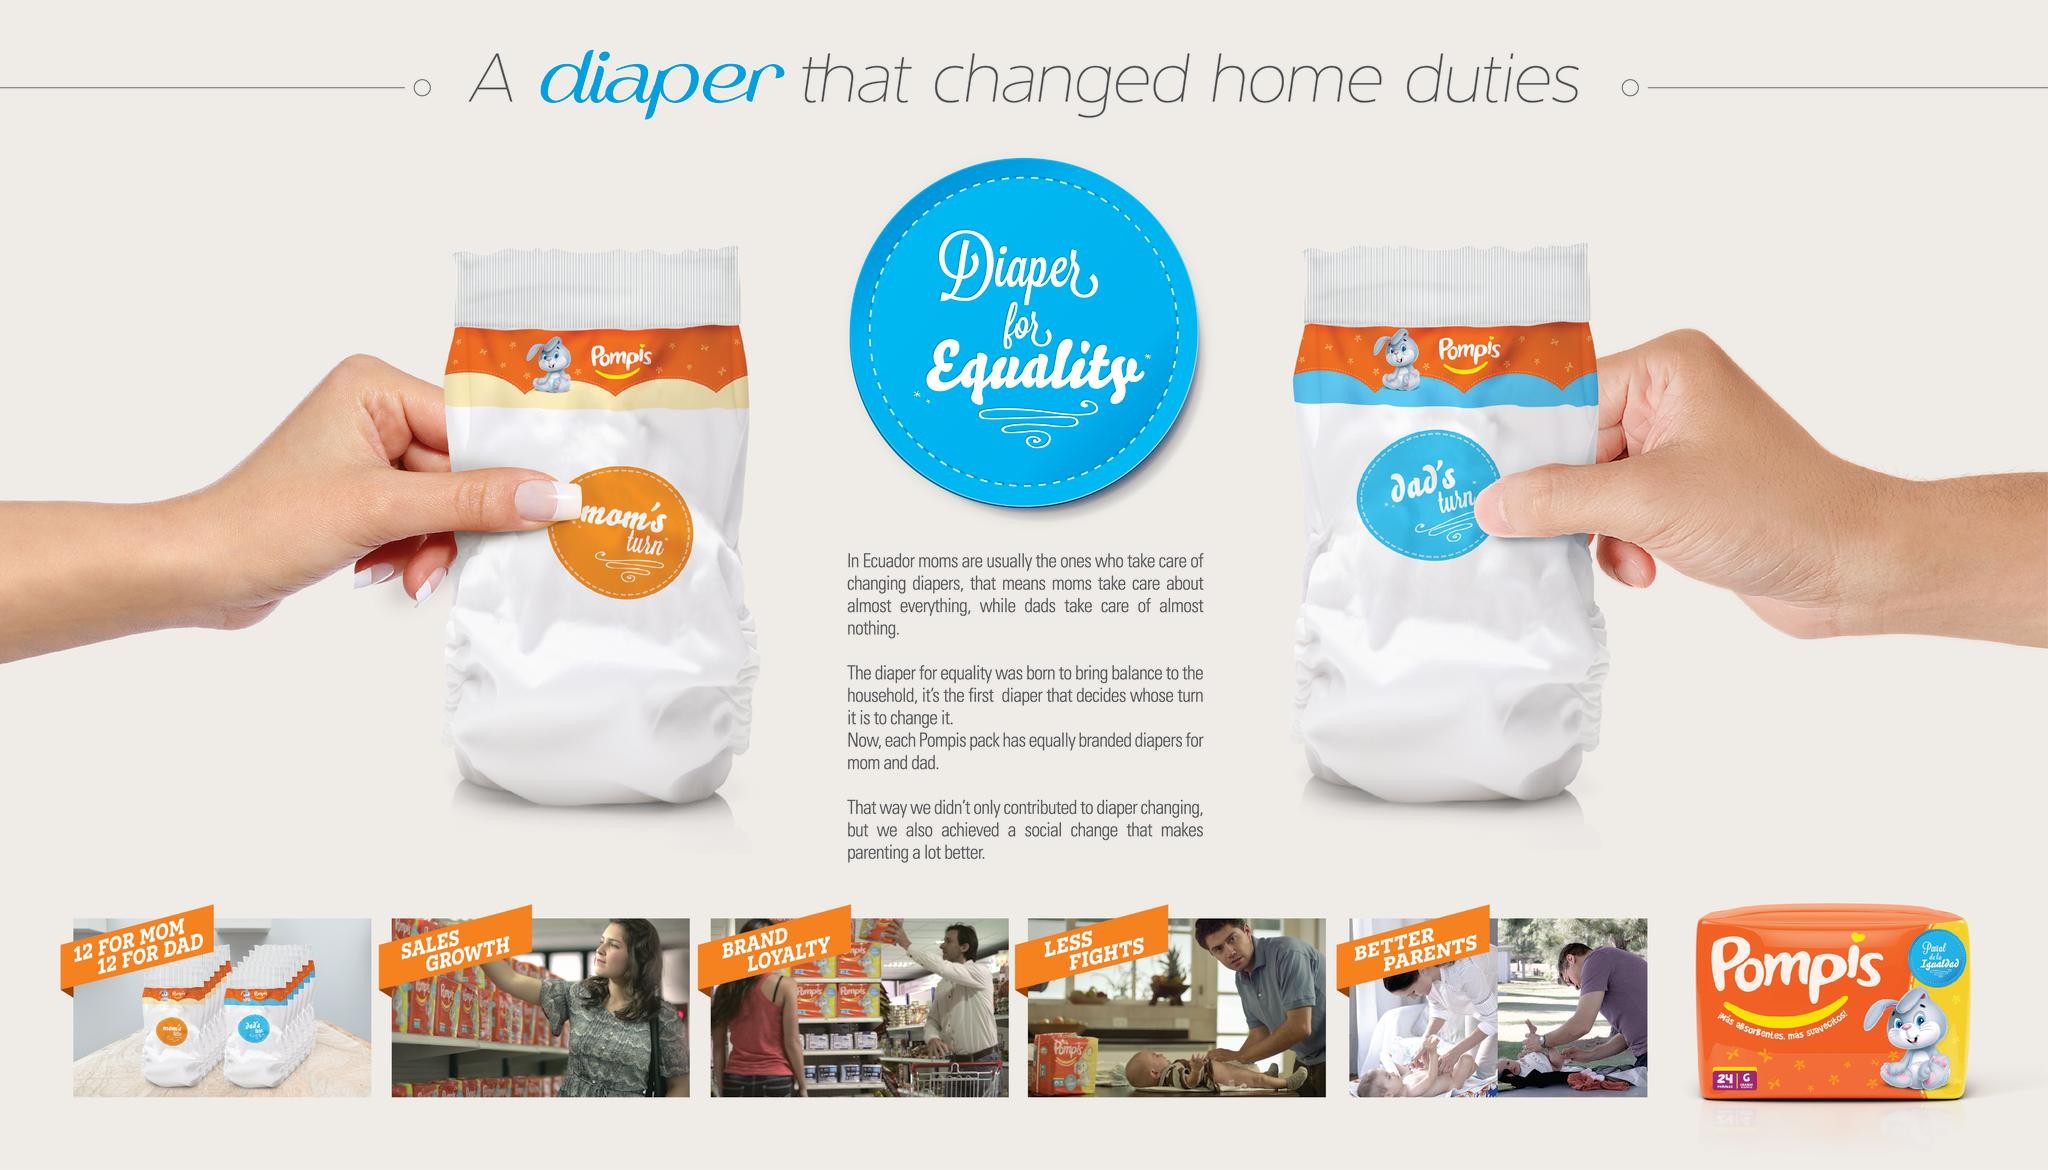 DIAPER FOR EQUALITY